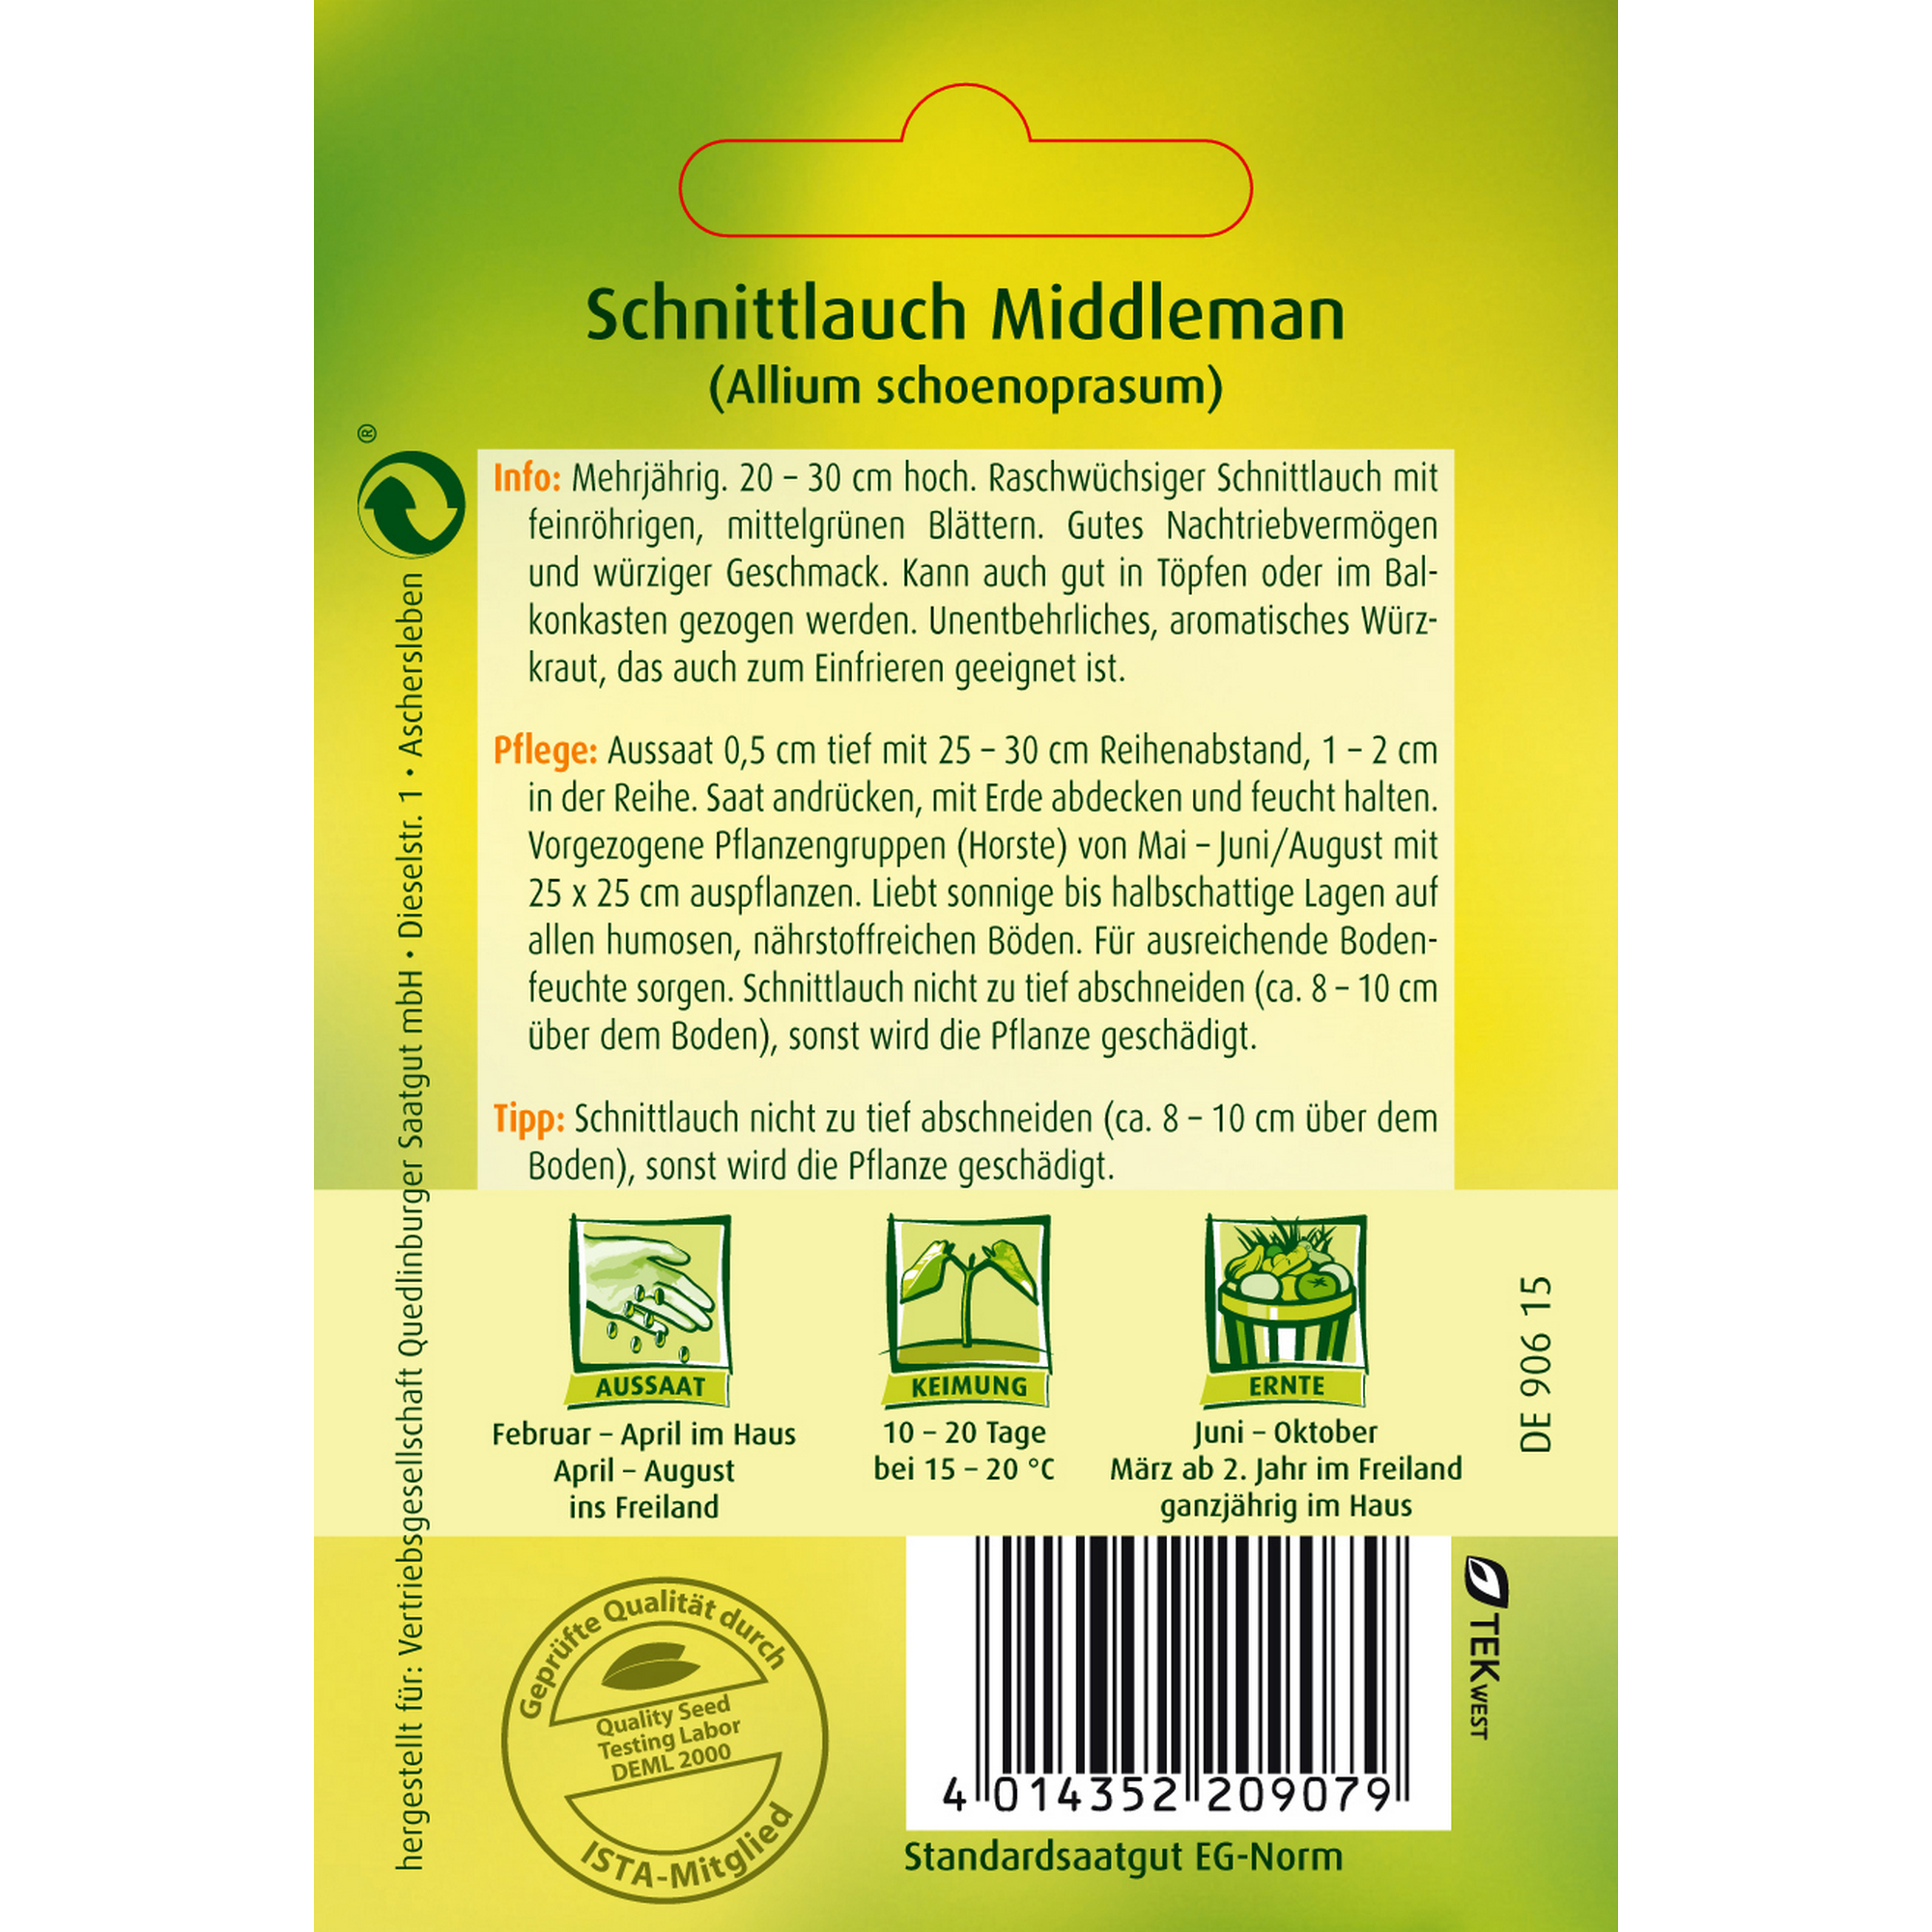 Schnittlauch 'Middleman' + product picture